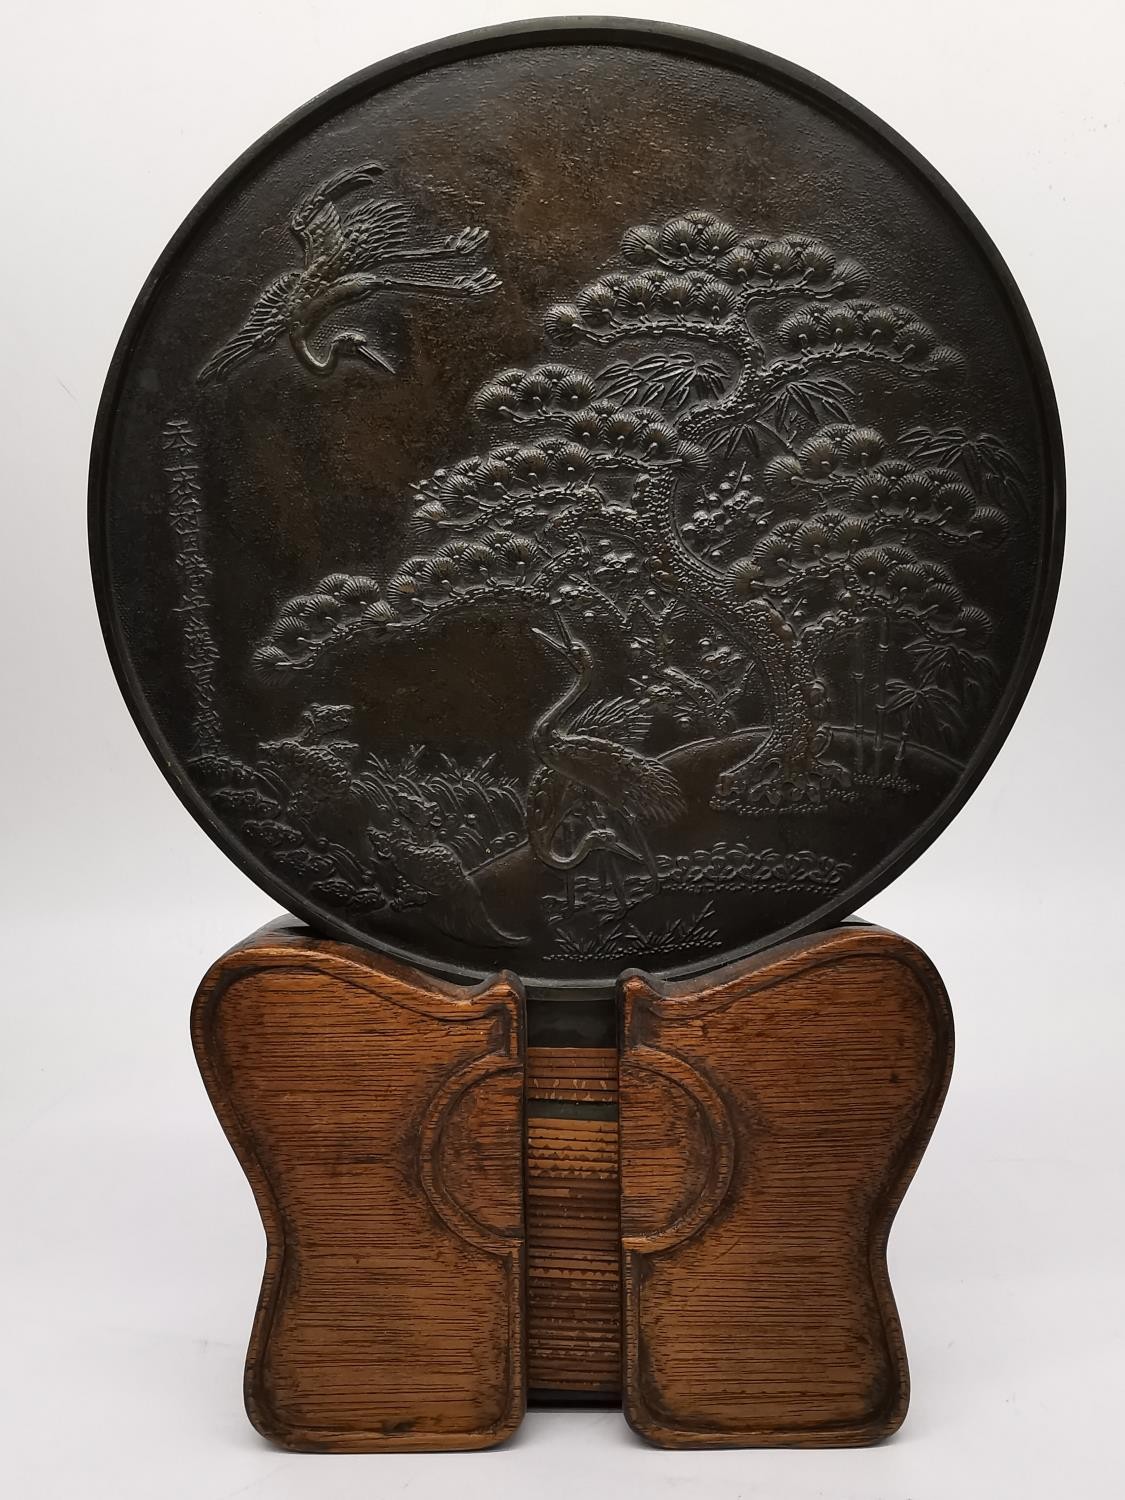 An early 20th century Japanese bronze Kagami mirror on wooden stand, decorated with a pine tree - Image 9 of 9